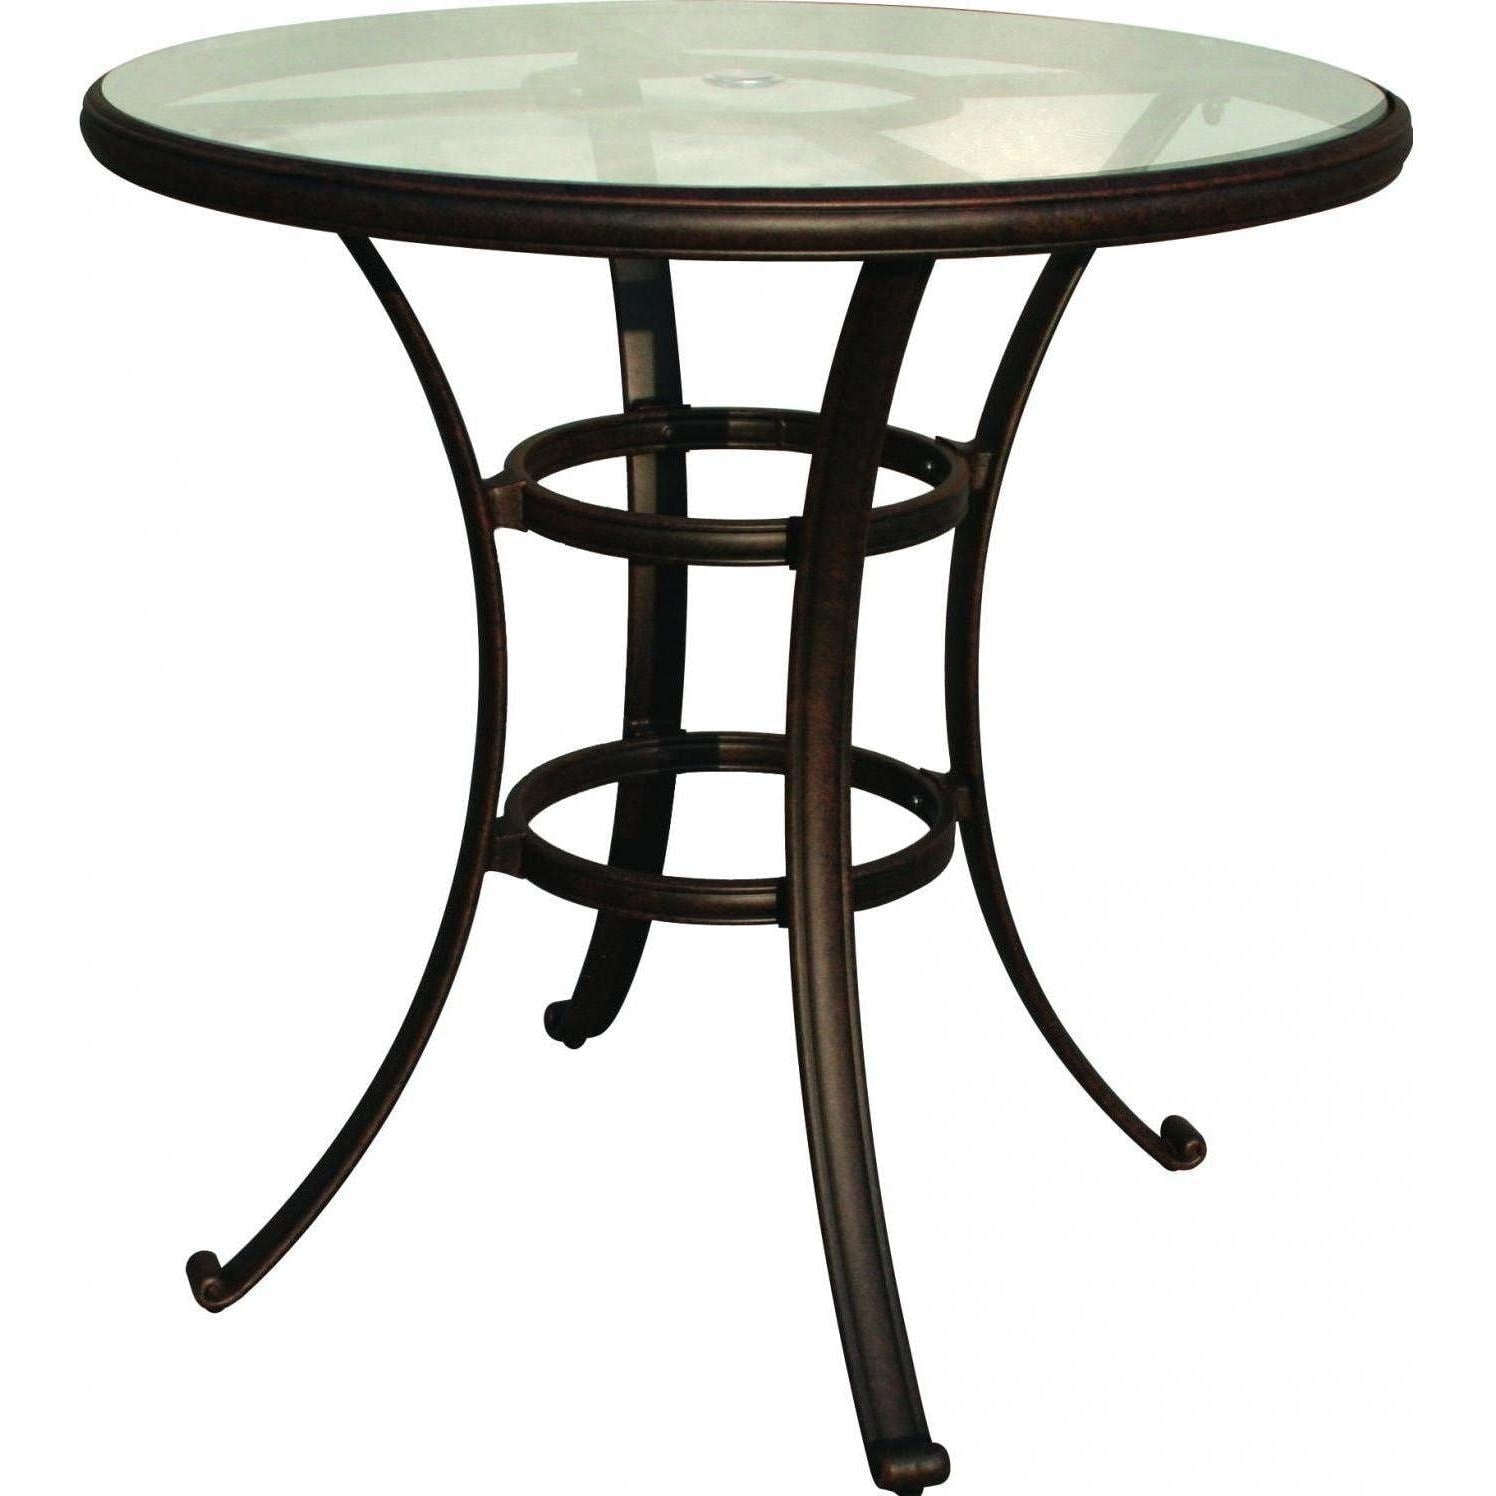 Darlee - Ten Star 5-Piece Patio Glass Top Bar Set with Cushions and 42'' Round Glass Top Bar Table  - DL503-5PC-50F